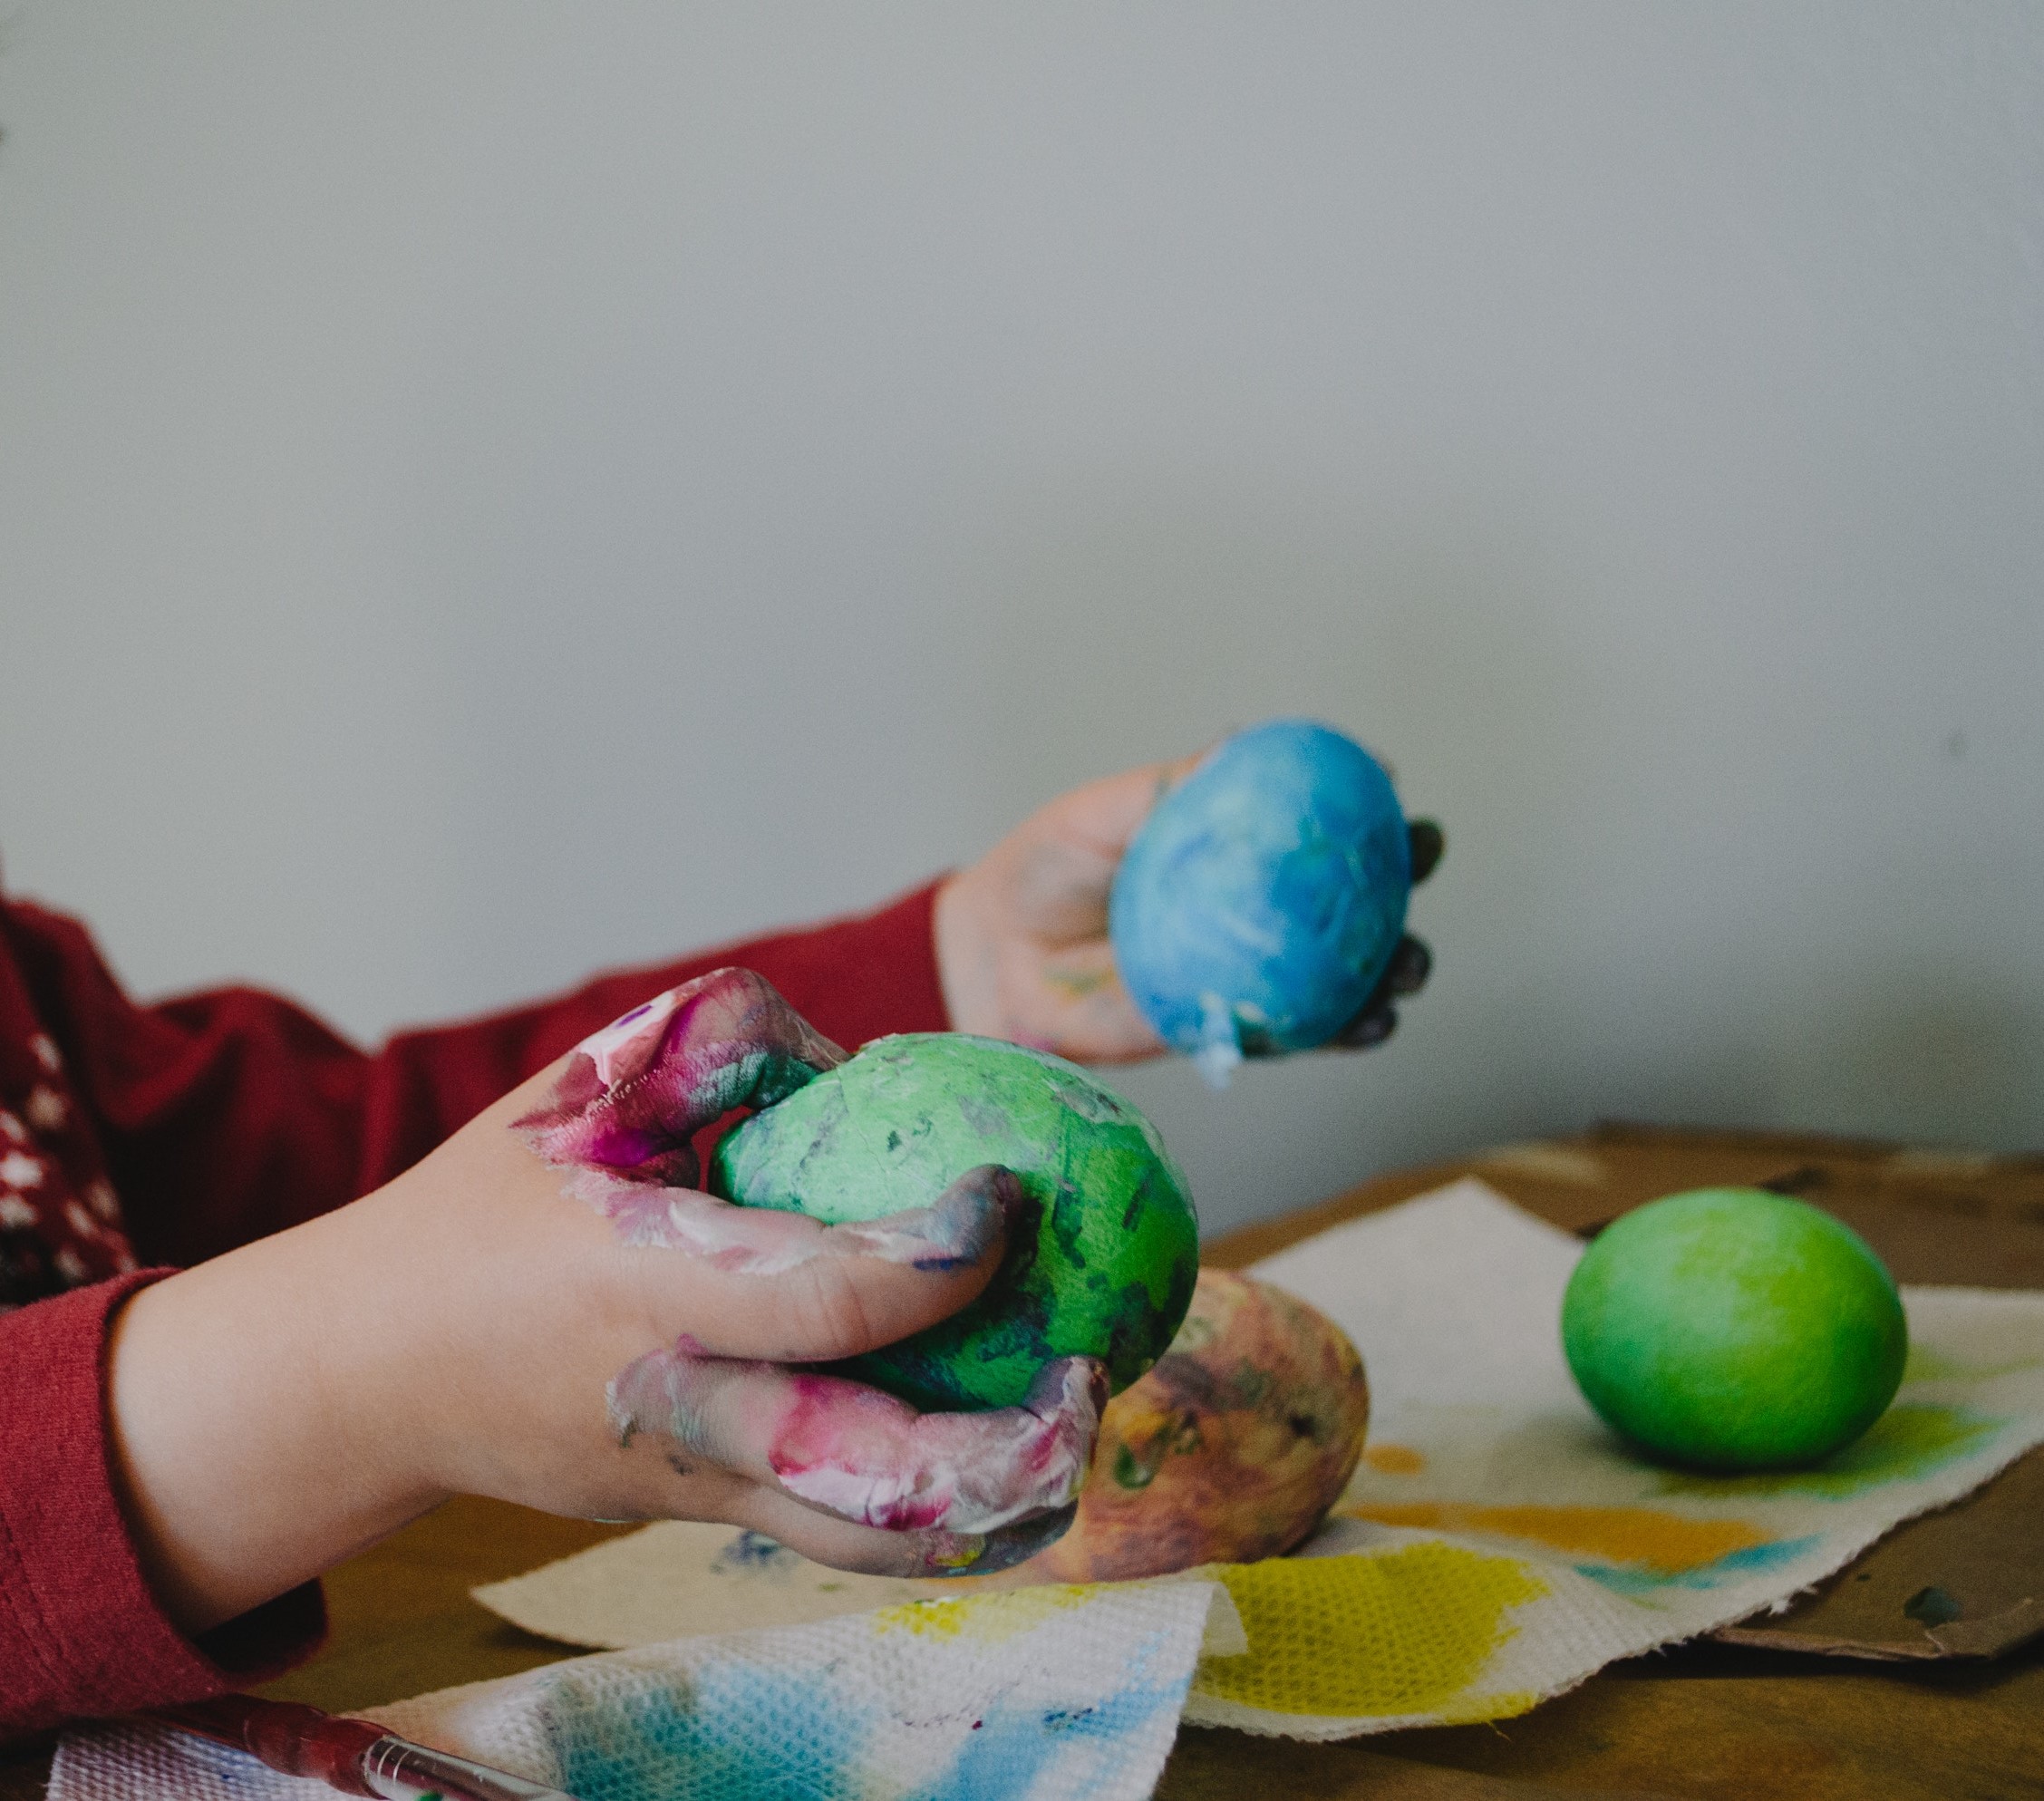 A kid holding two colored Easter eggs in its paint-covered hands.